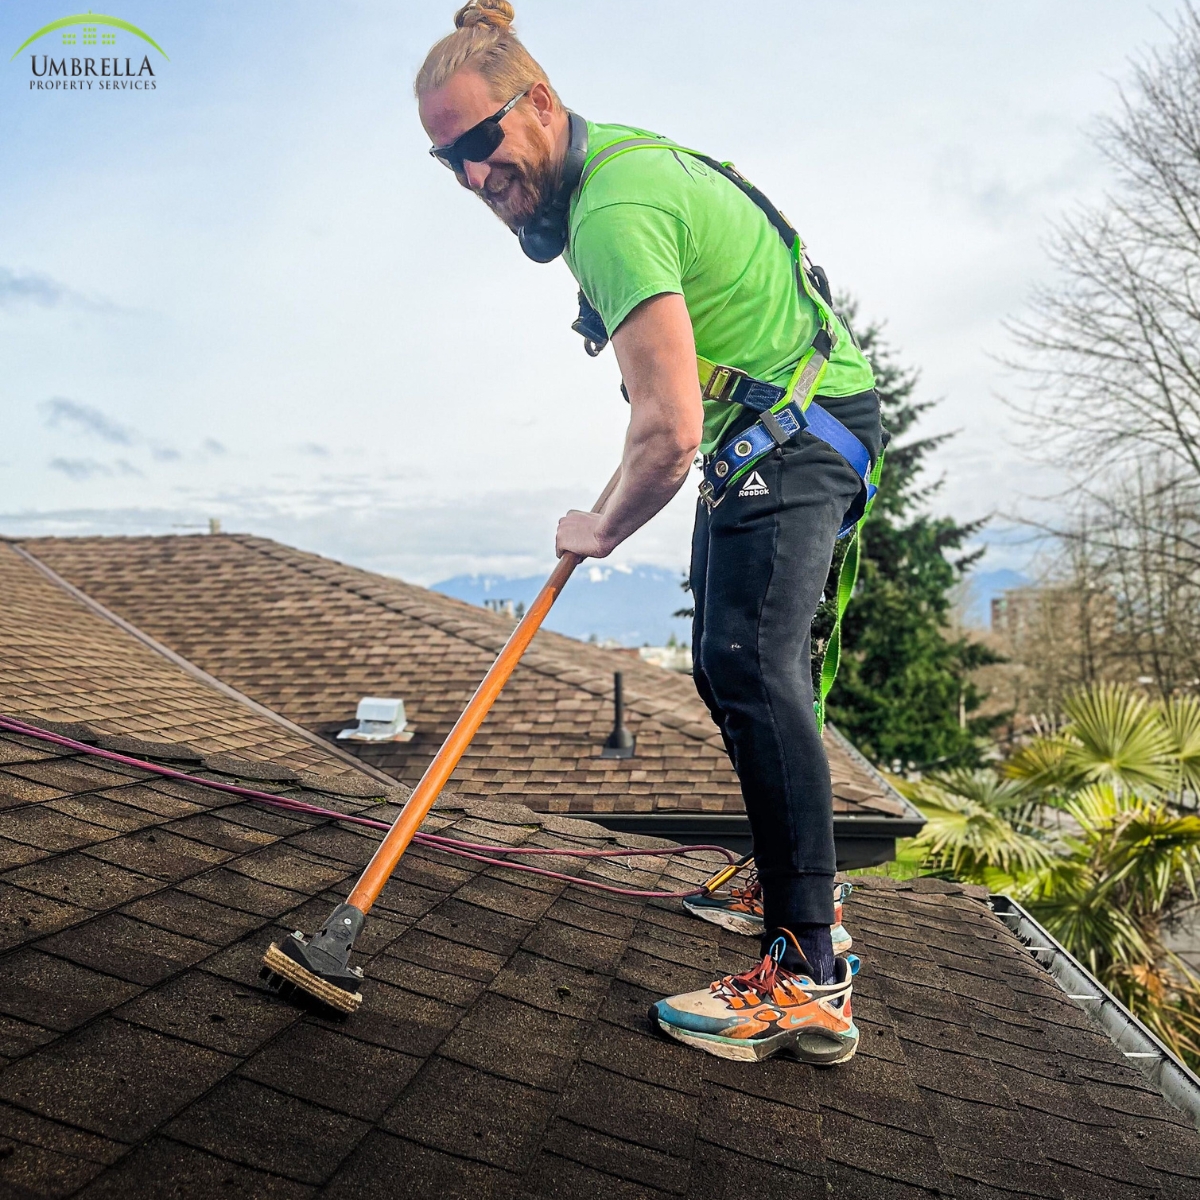 Attention homeowners in Kitsilano! Don't let a dirty roof bring down the look of your beautiful home. Let Michal take care of it for you. Contact us today for a free quote!

#kitsilano #kitsilanoroofcleaning #roofcleaning #vanre #umbrellaservices #vancouver #cleancouver